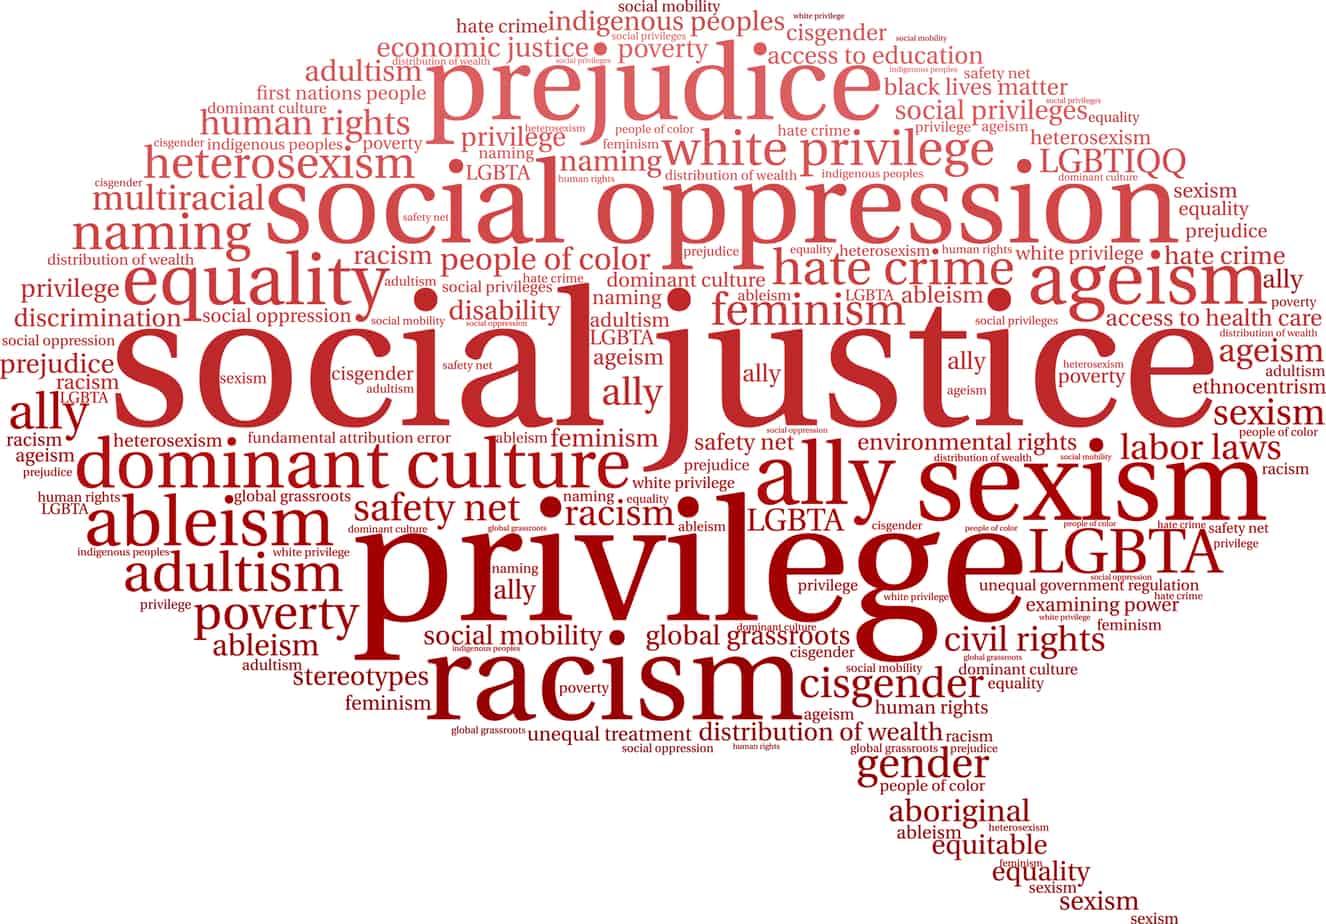 Social Justice Day